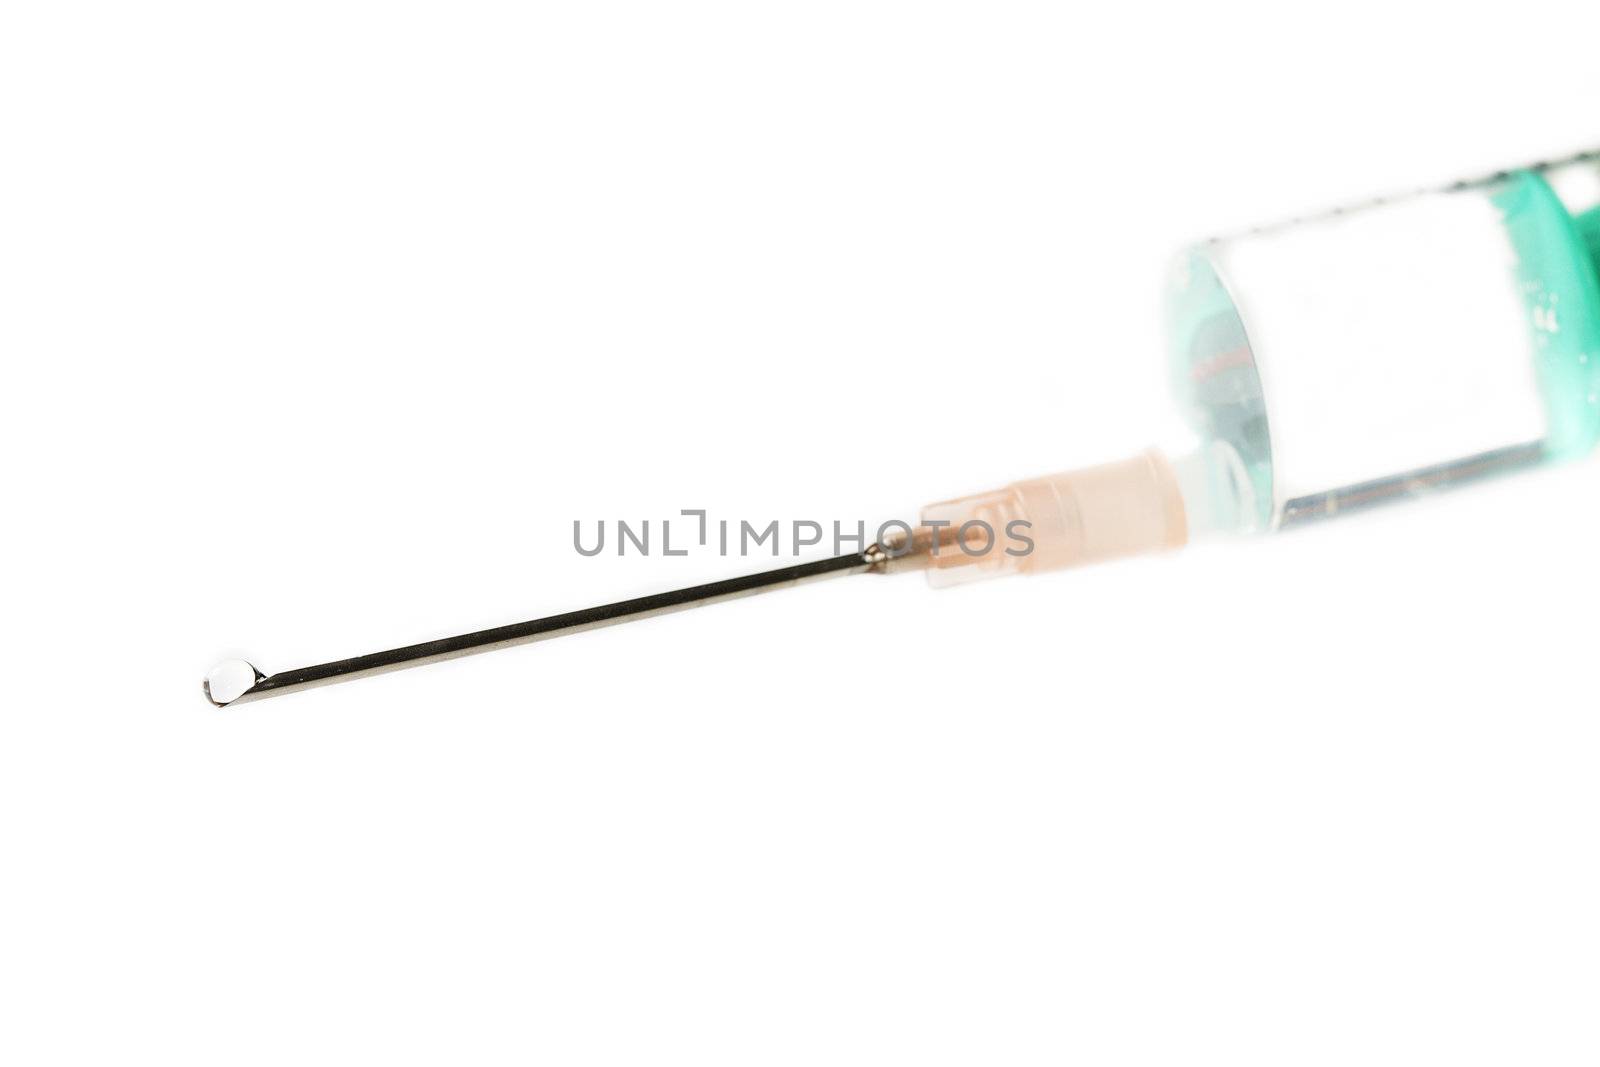 one syringe with a drop on white background